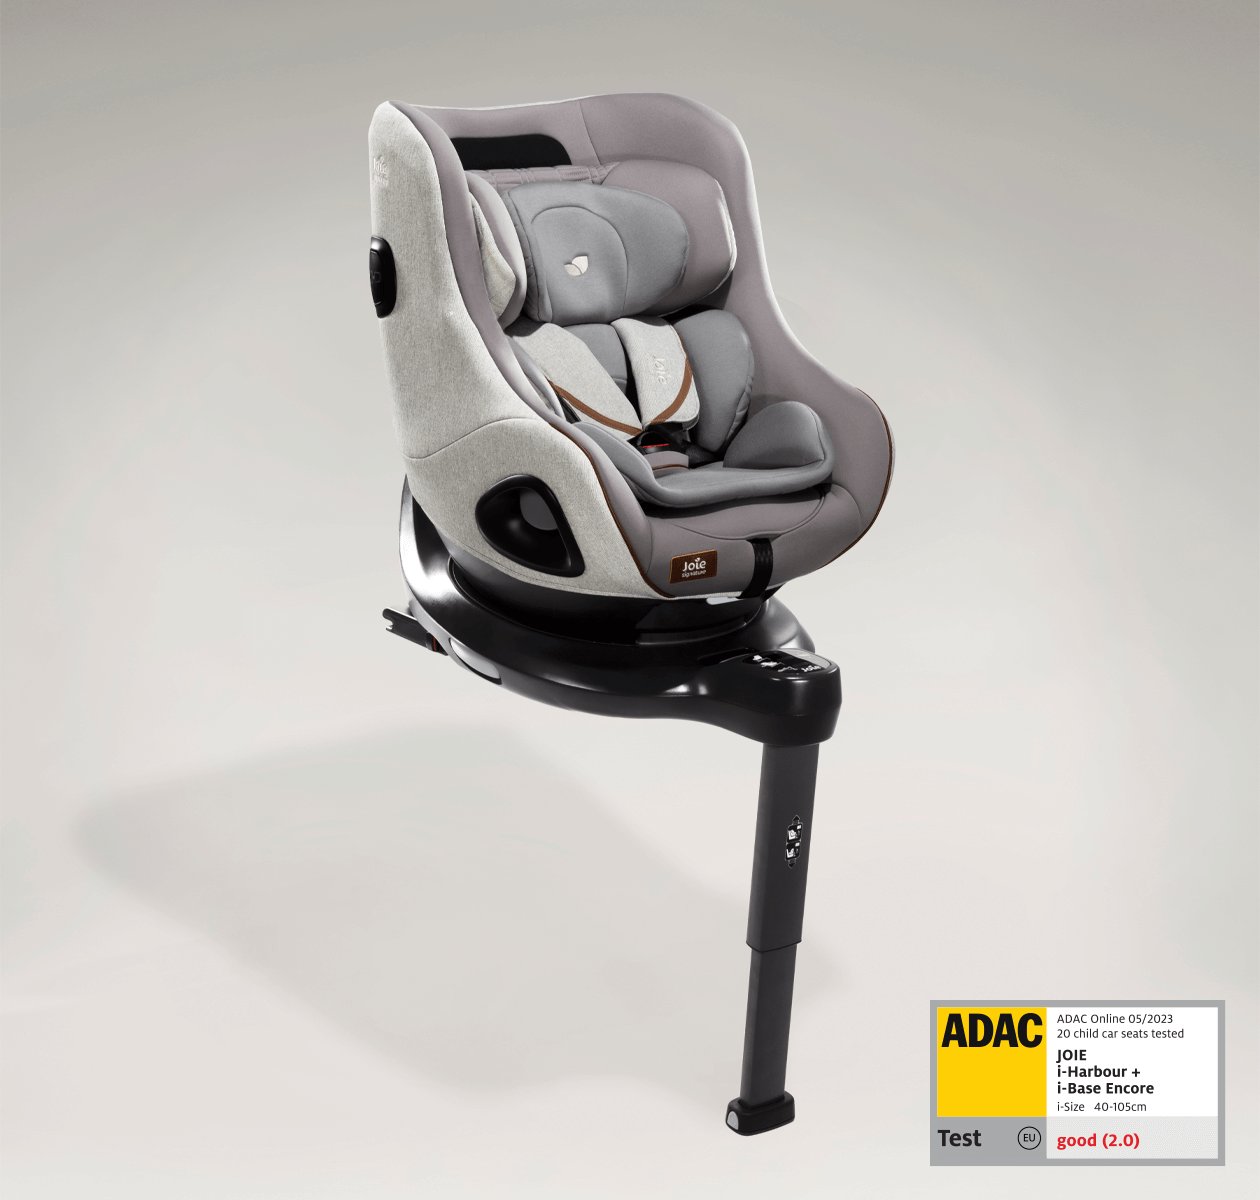 Light gray Joie i-Harbour car seat at an angle, with the ADAC test label in the lower right corner.